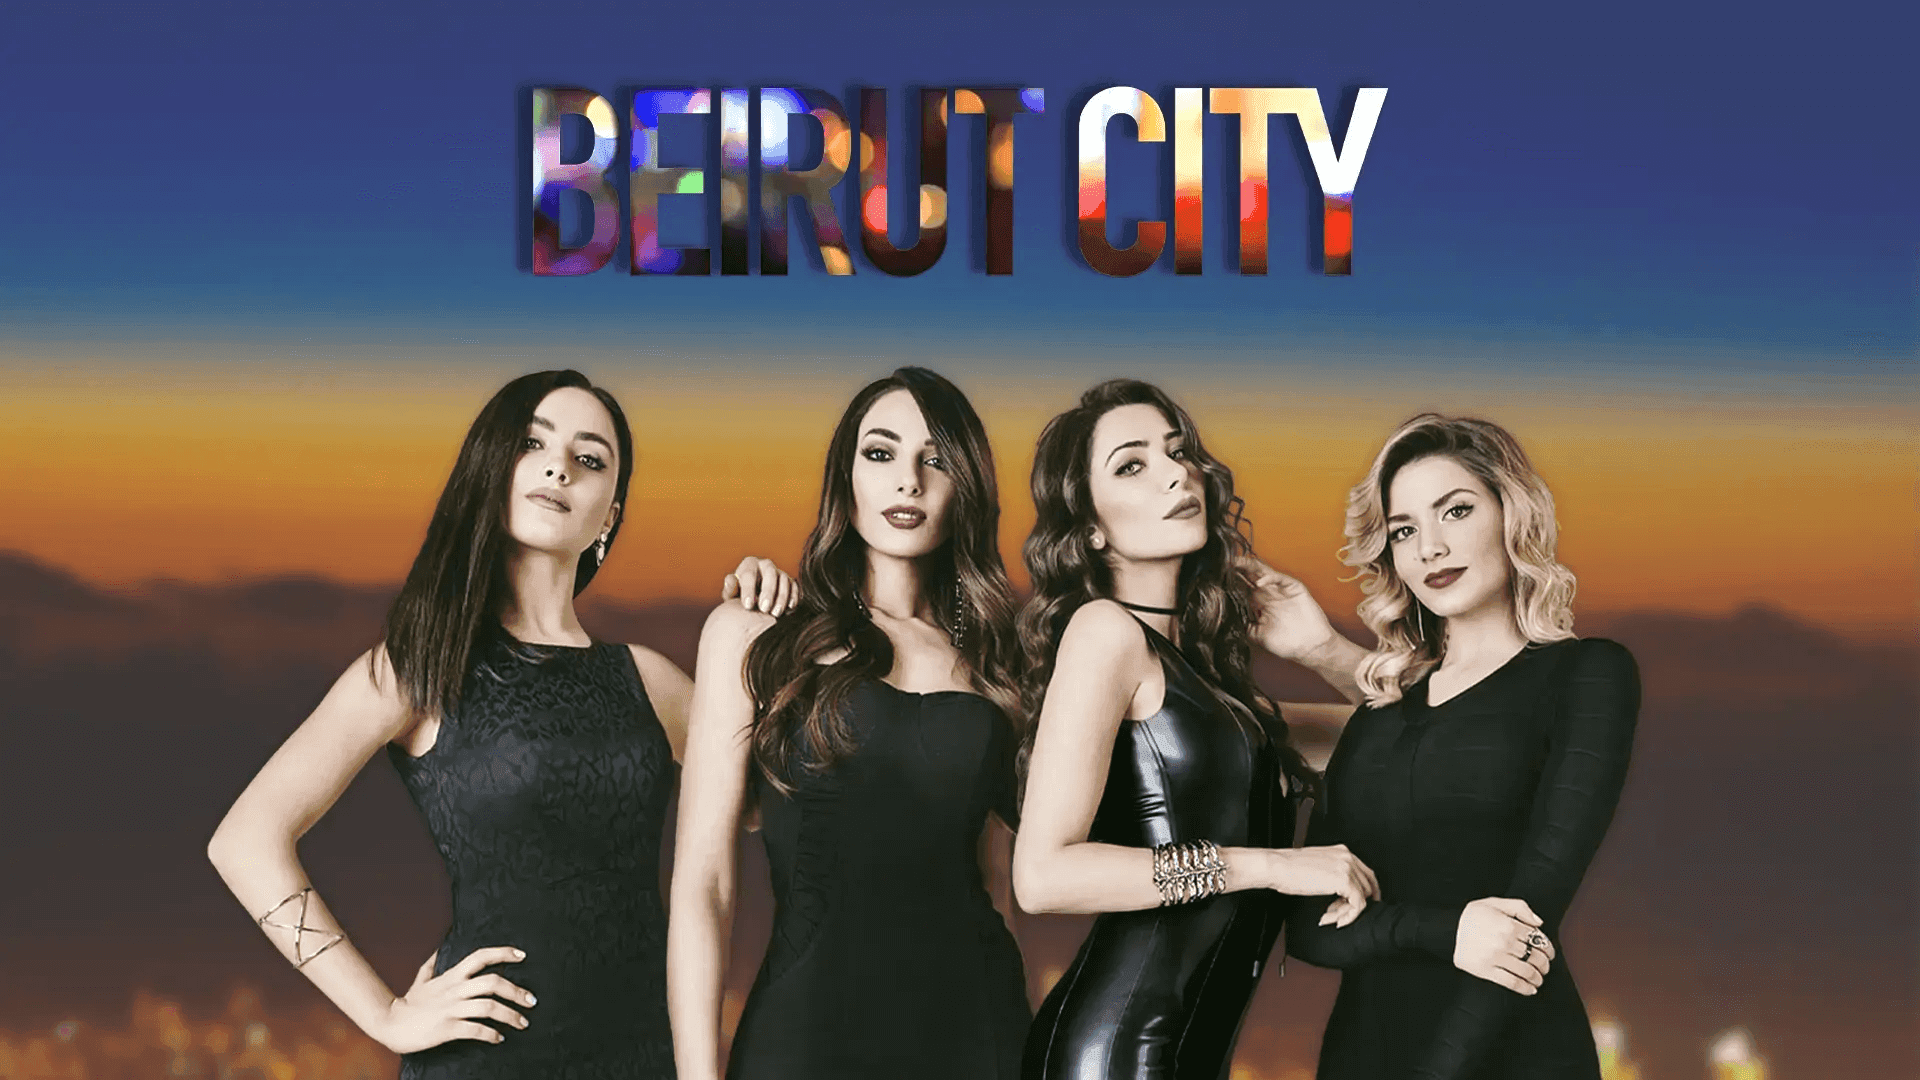 images/1_FastTV/Serials/Beirut City/BC 4.png